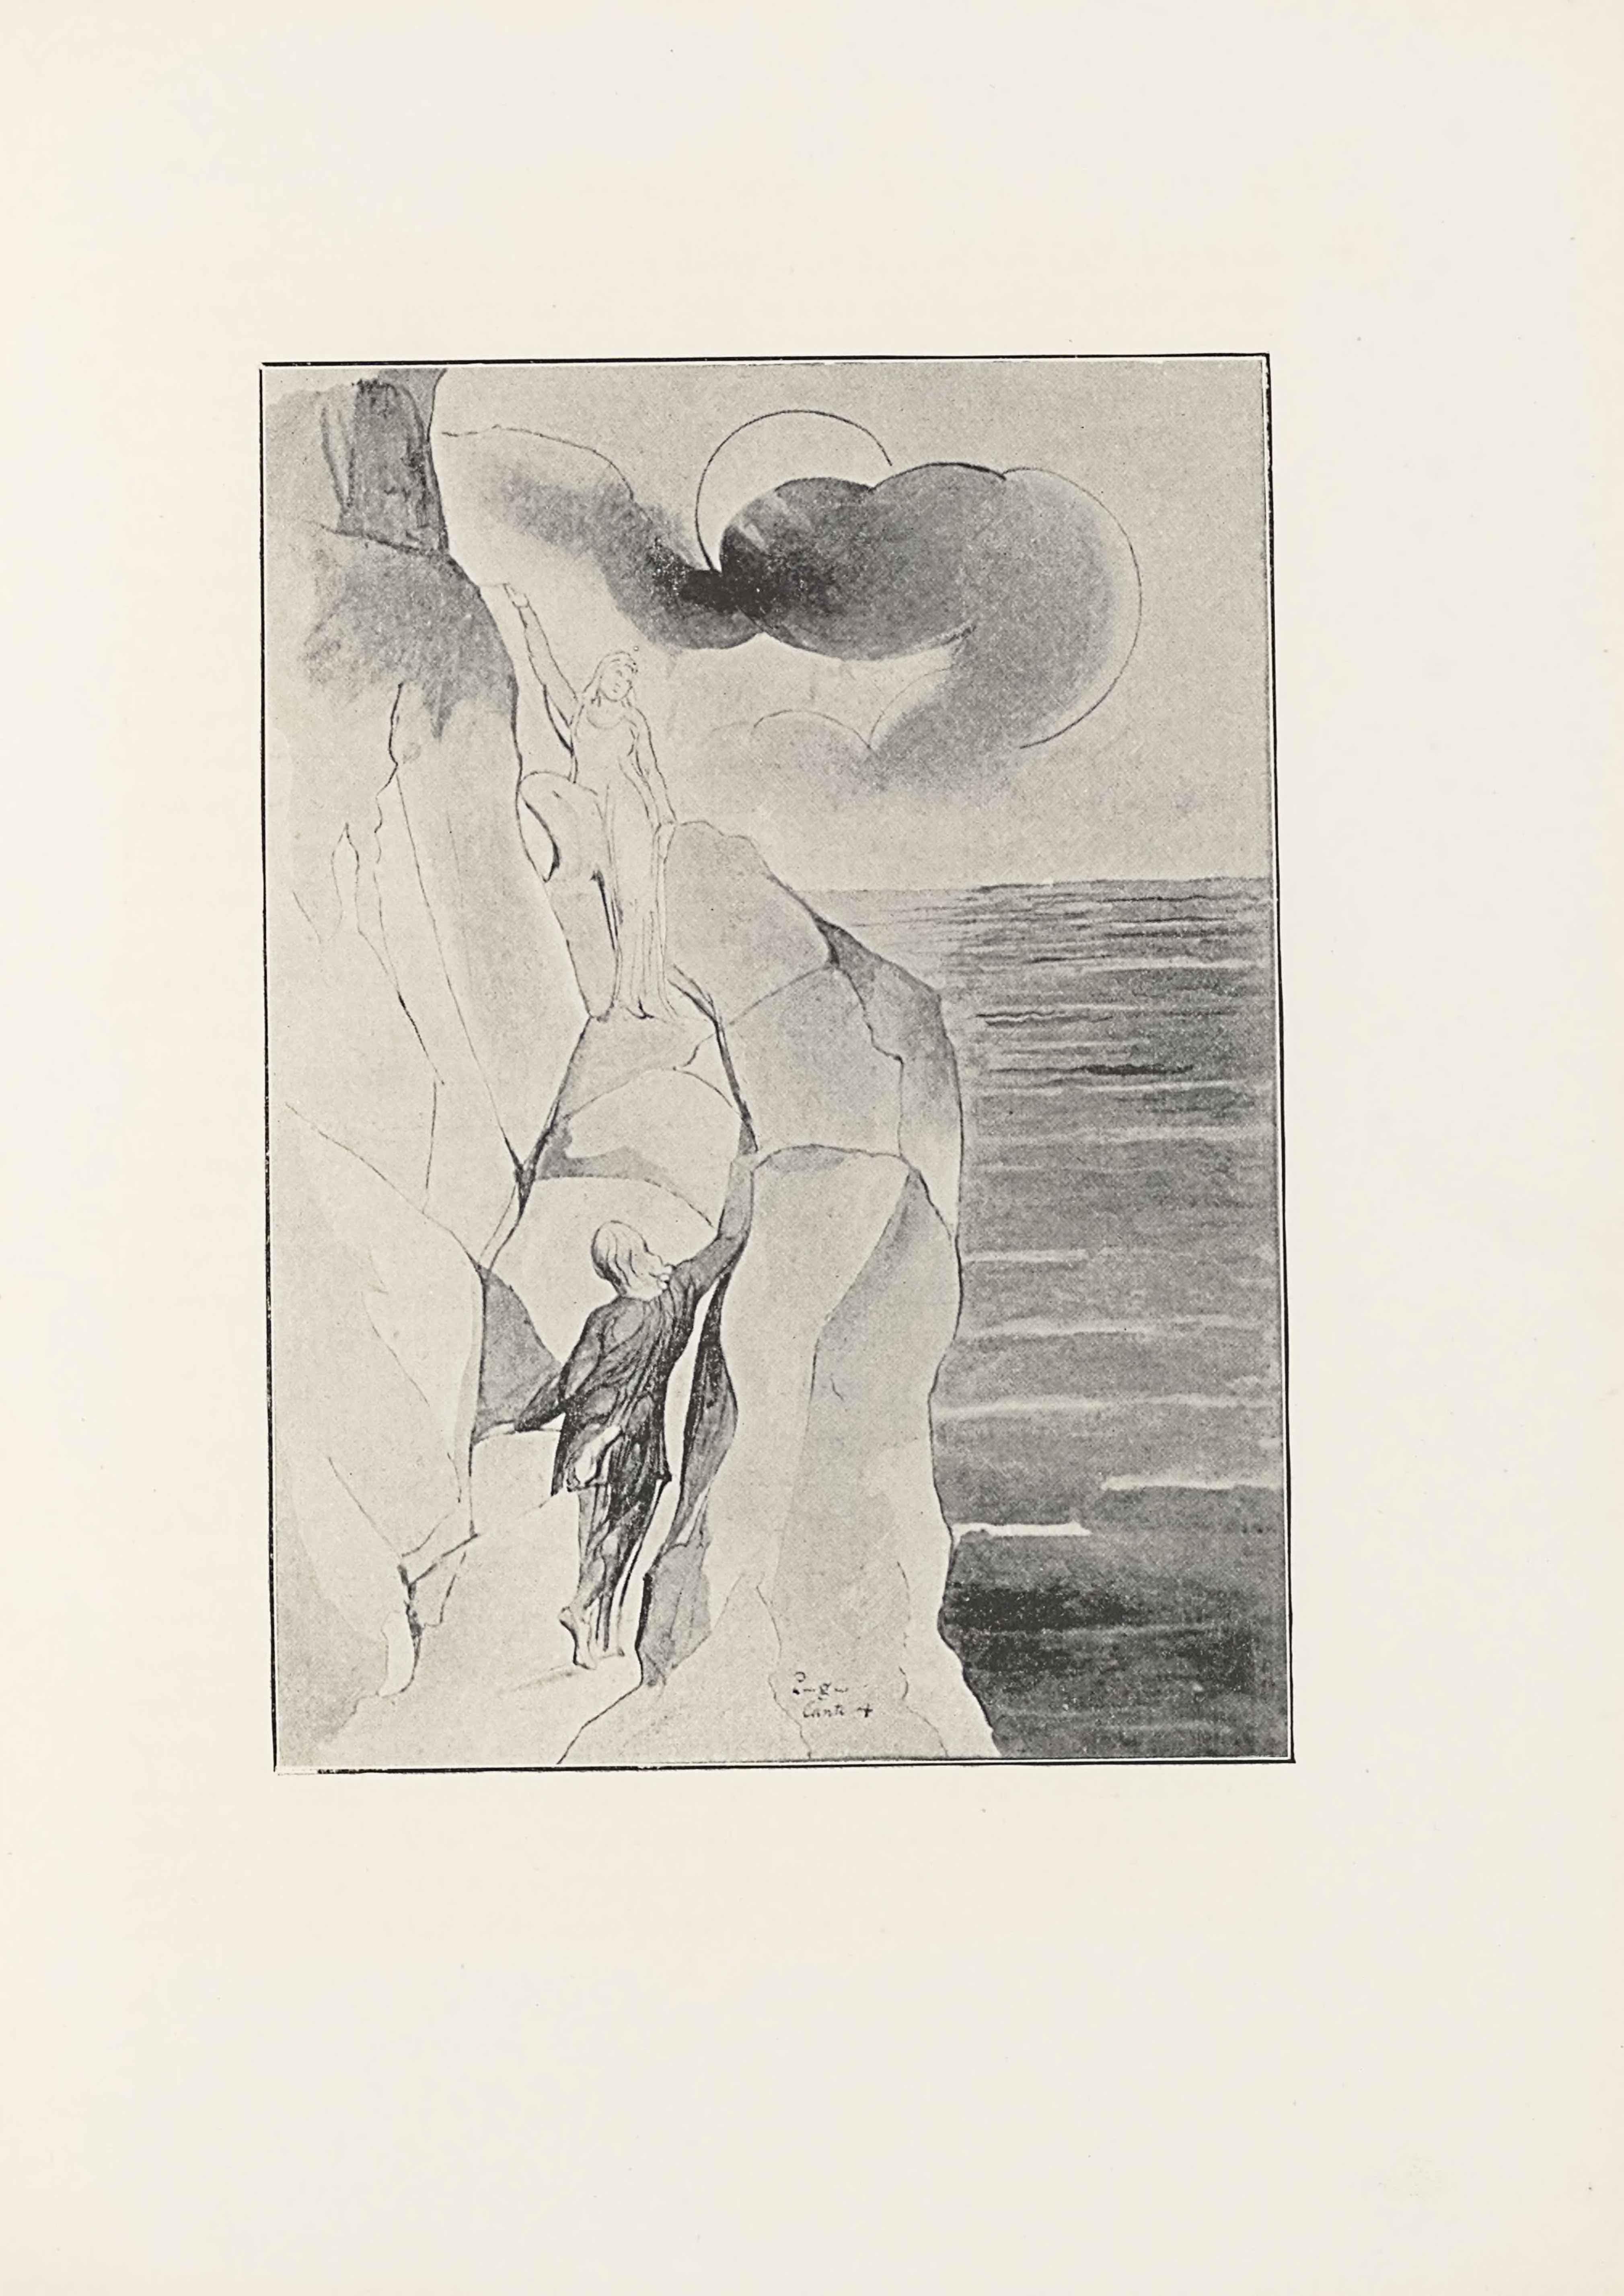 This halftone reproduction of Blake’s water-colour drawing for Dante’s Purgatory is in portrait orientation. The image shows a rocky mountain on the left with sea and a sky on the right. The mountain is being climbed two male figures, Dante and Virgil. One figure higher up beckons towards another figure who is ascending. The mountain is comprised of many large rocks. The climbing figure has his back to the viewer and is wearing dark pants and a loose, dark long-sleeve shirt. The figure’s right arm is extended up and to the right, reaching to the top of a chunk of rock. His right foot is drawn back, and his left hand is resting down on a rock to the left. This figure has light hair that falls to just below the shoulders. At three-quarters of the height of the page is the other figure. This figure is facing the viewer, and standing on one rock with just their left foot. The figure’s right leg is bent up and the right foot is resting on a higher rock. The figure’s left arm is down by his side. The figure’s right arm is lifted straight up and to the right of his head. The figure is wearing a transparent robe that flows around the body. HIs head is tilted down slightly to look at the water below to the right on the page. There is more rock rising above and to the left behind him. In the background is the sky, with one large circle representing the sun or moon in the centre of the sky and a trail of dark mist is in front and across it. To the right of the mountain and from the mid-height of the page down is wavy and dark water of the sea. The top half of the page behind the sun is open sky. In the centre of the foreground on top of the bottom of the rocky mountain is text that reads:: “Purgatory // Canto 4”.